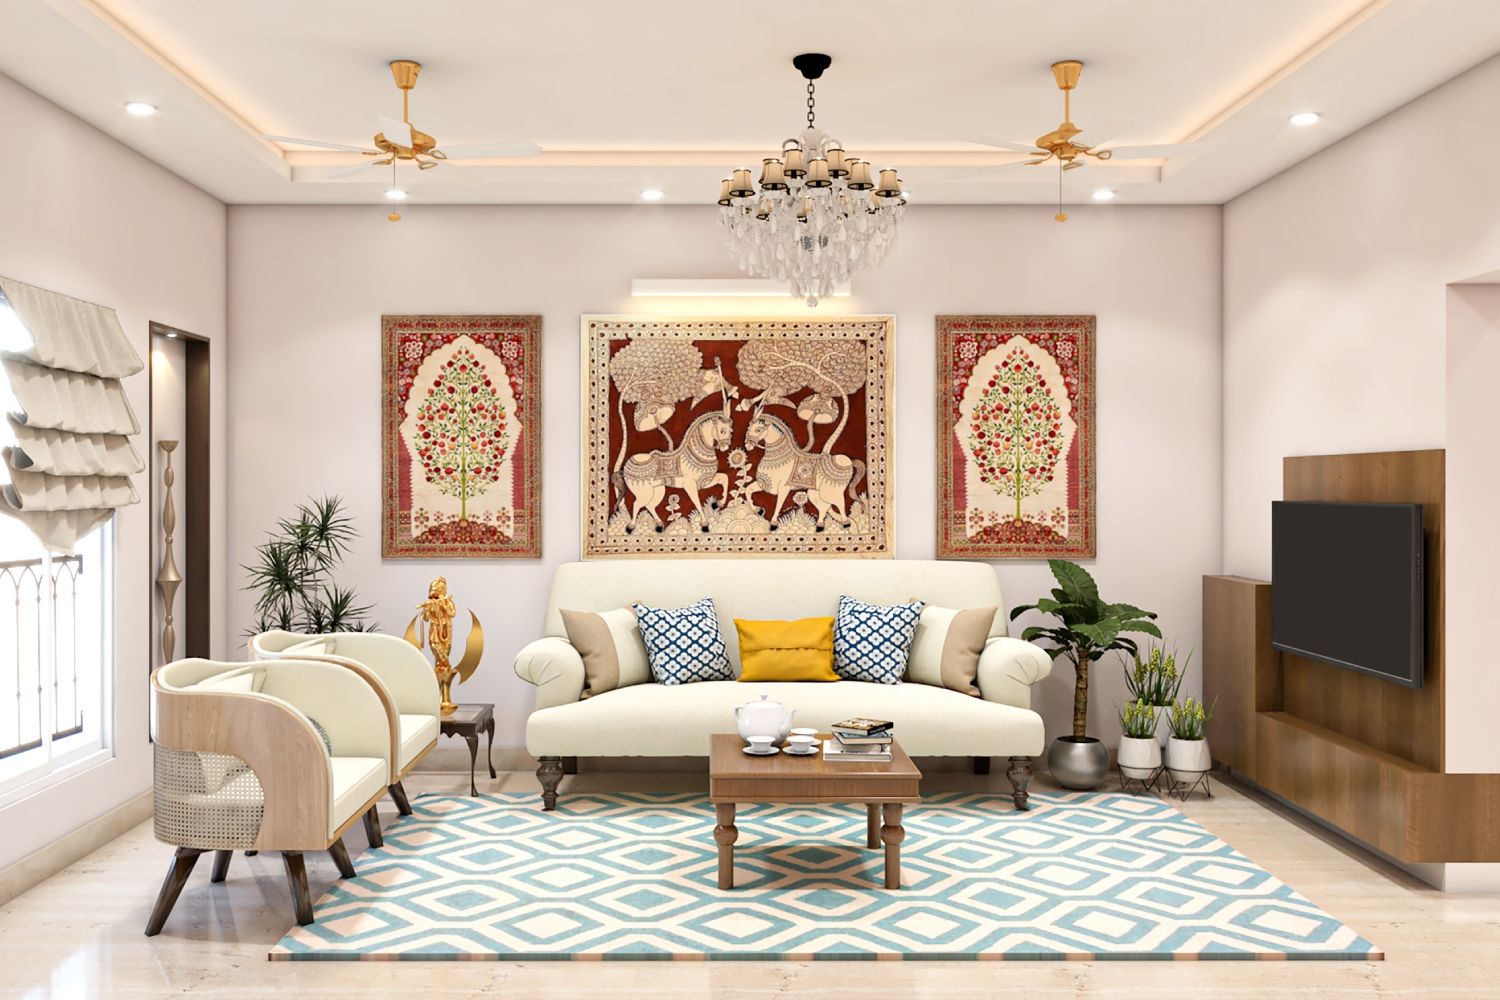 Traditional Living Room Design With Cream Three Seater Upholstered Sofa And Madhubani Painting